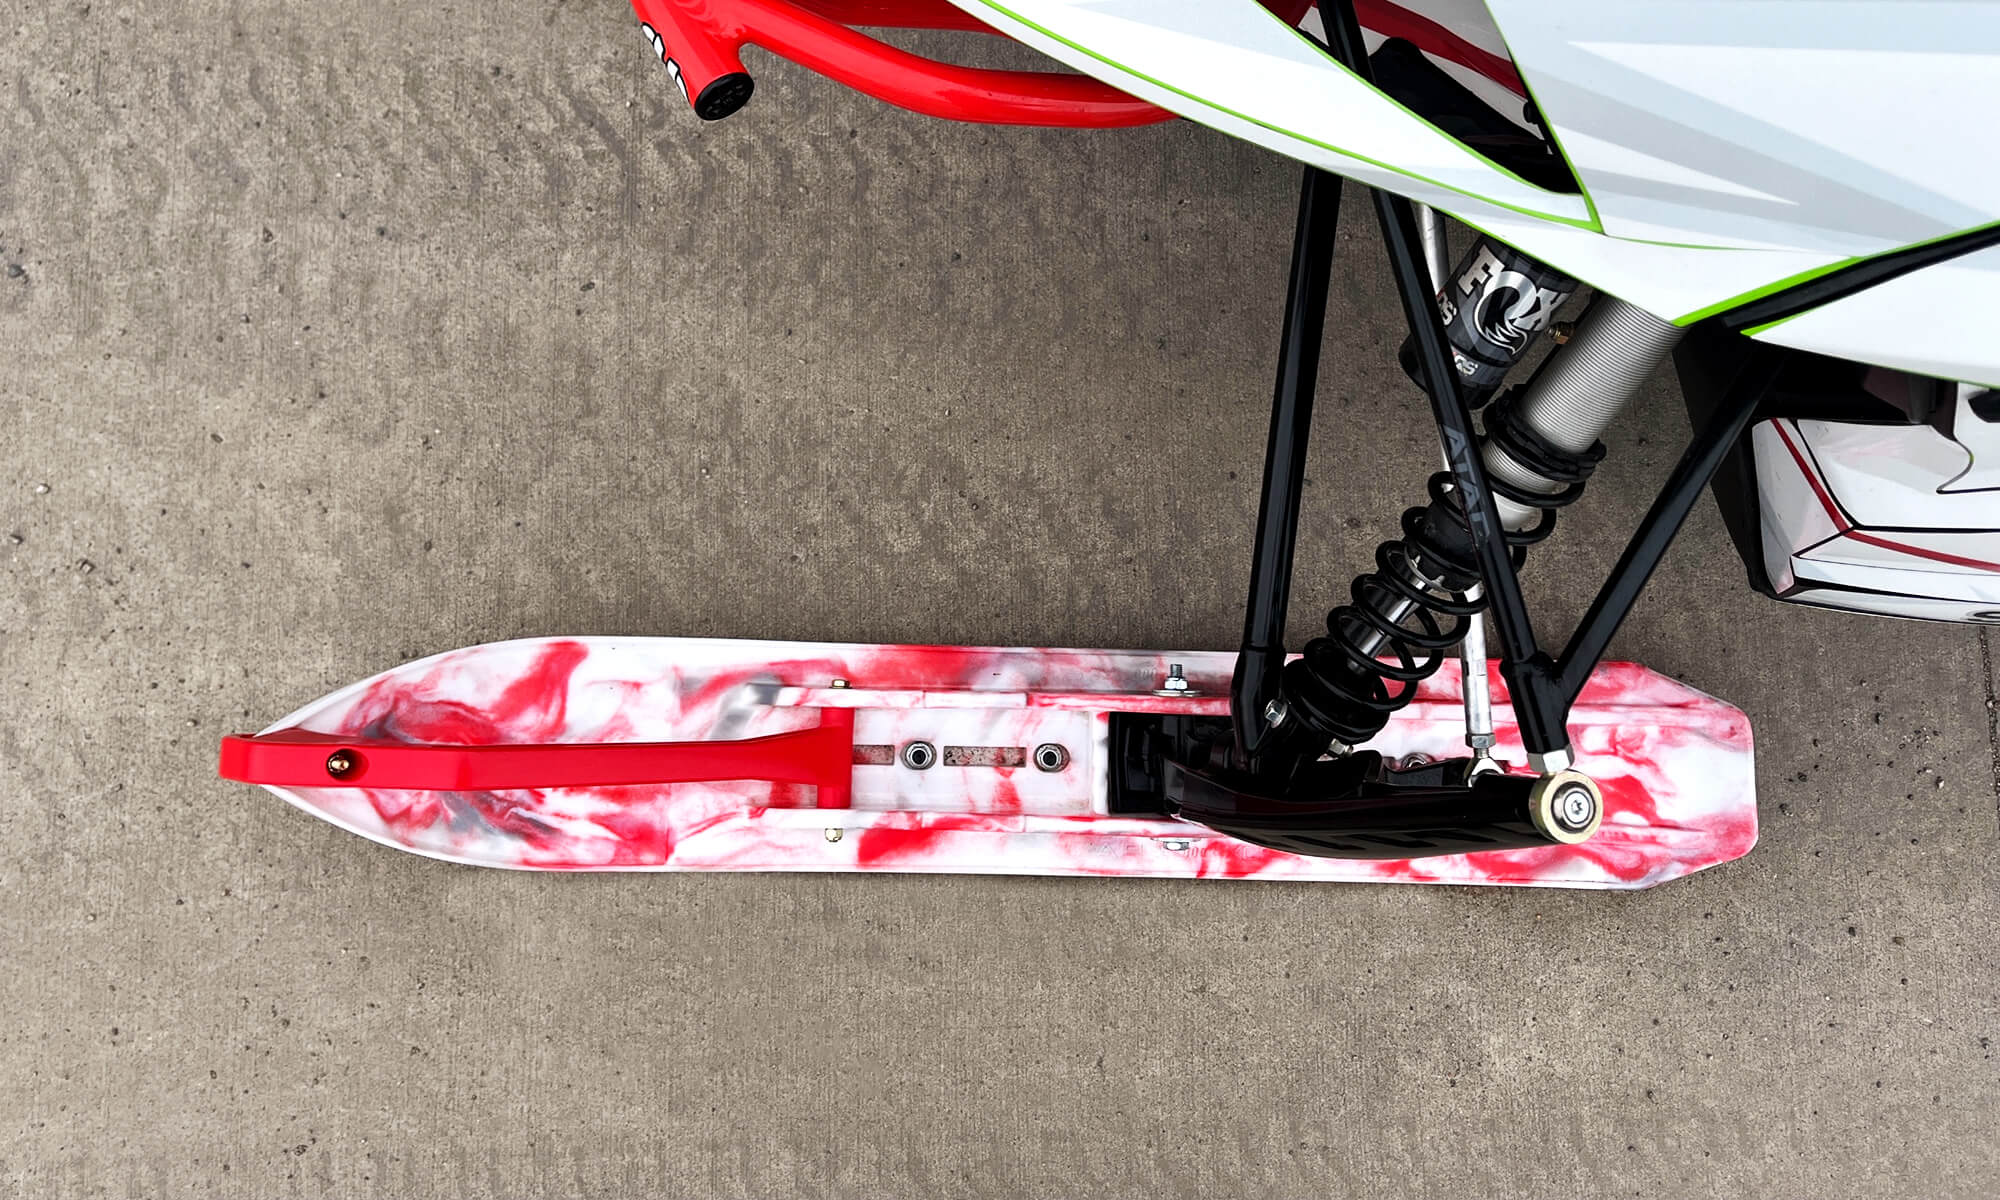 White, red and gray custom swirl C&A Pro XCS ski with red handle installed on Arctic Cat snowmobile